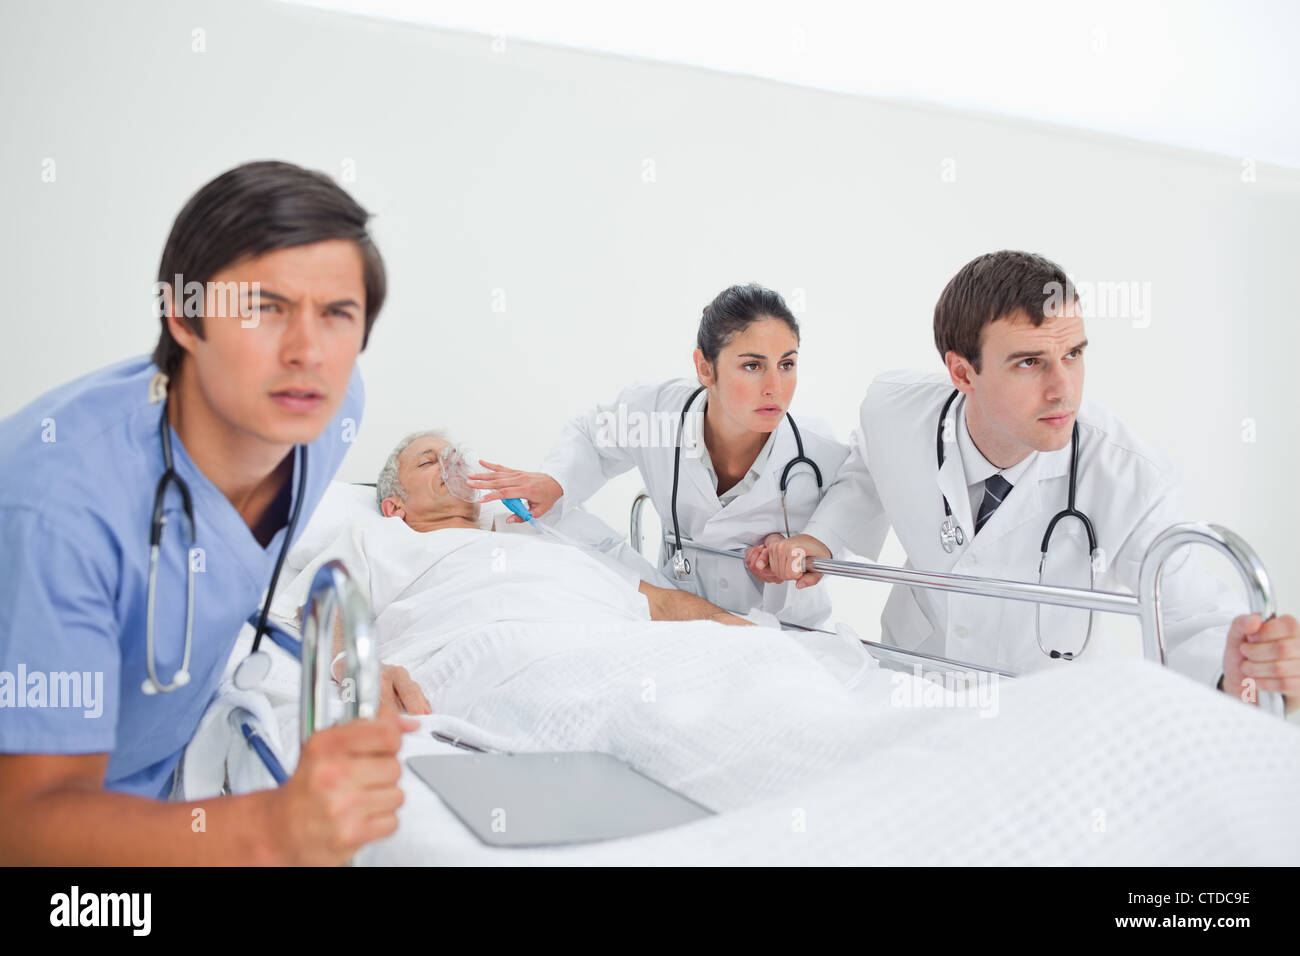 Nurse and two doctors seriously pushing a hospital bed Stock Photo